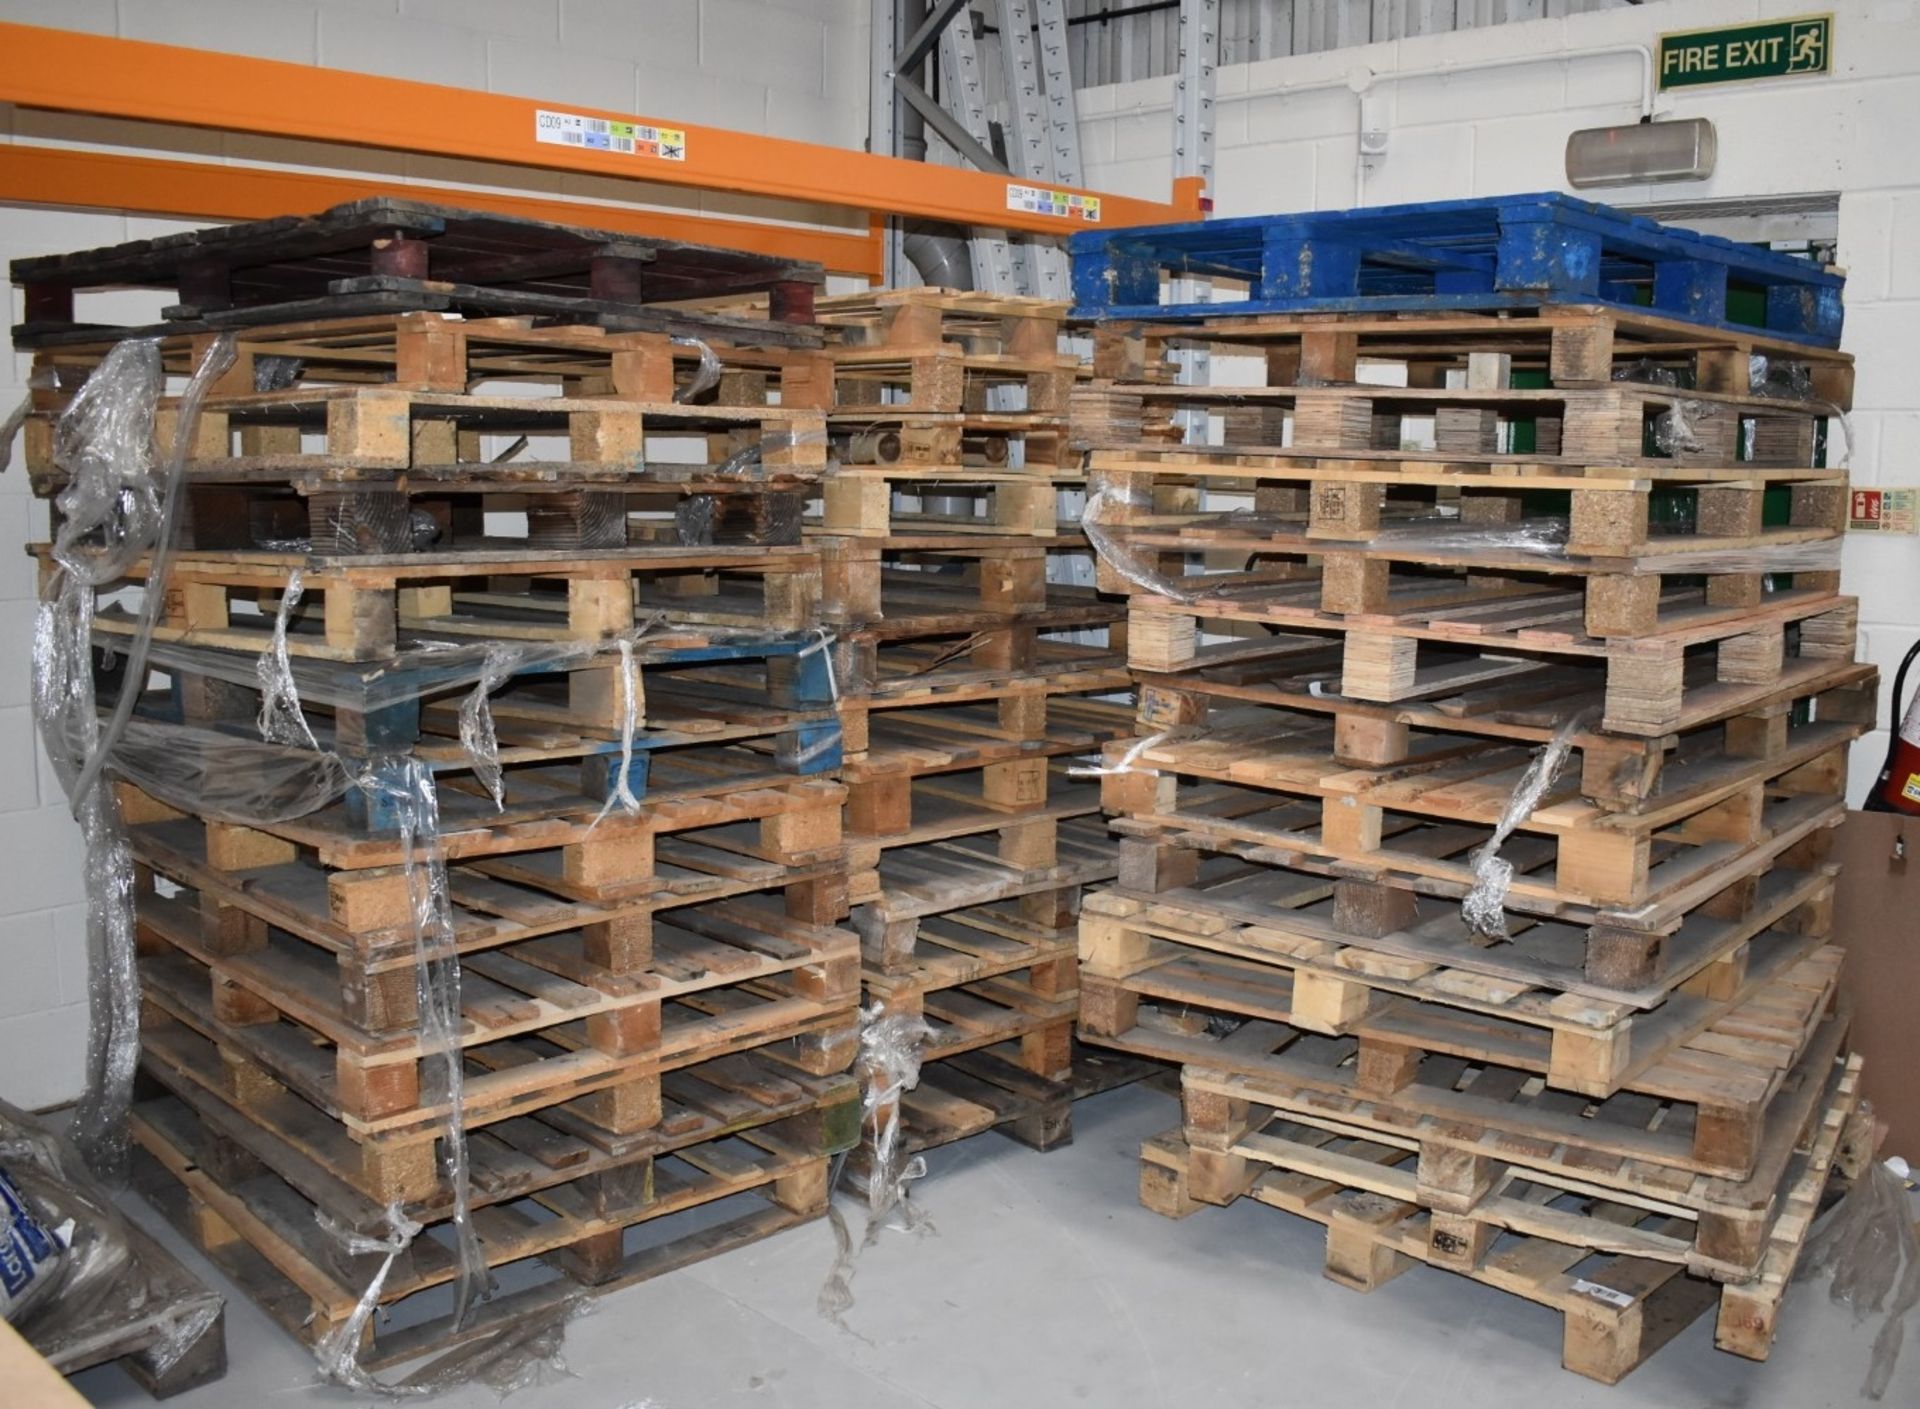 Approx 120 x UK Sized Pallets - 120 x 100 cm Wooden Pallets From Warehouse Clearance - The Pallets - Image 10 of 11